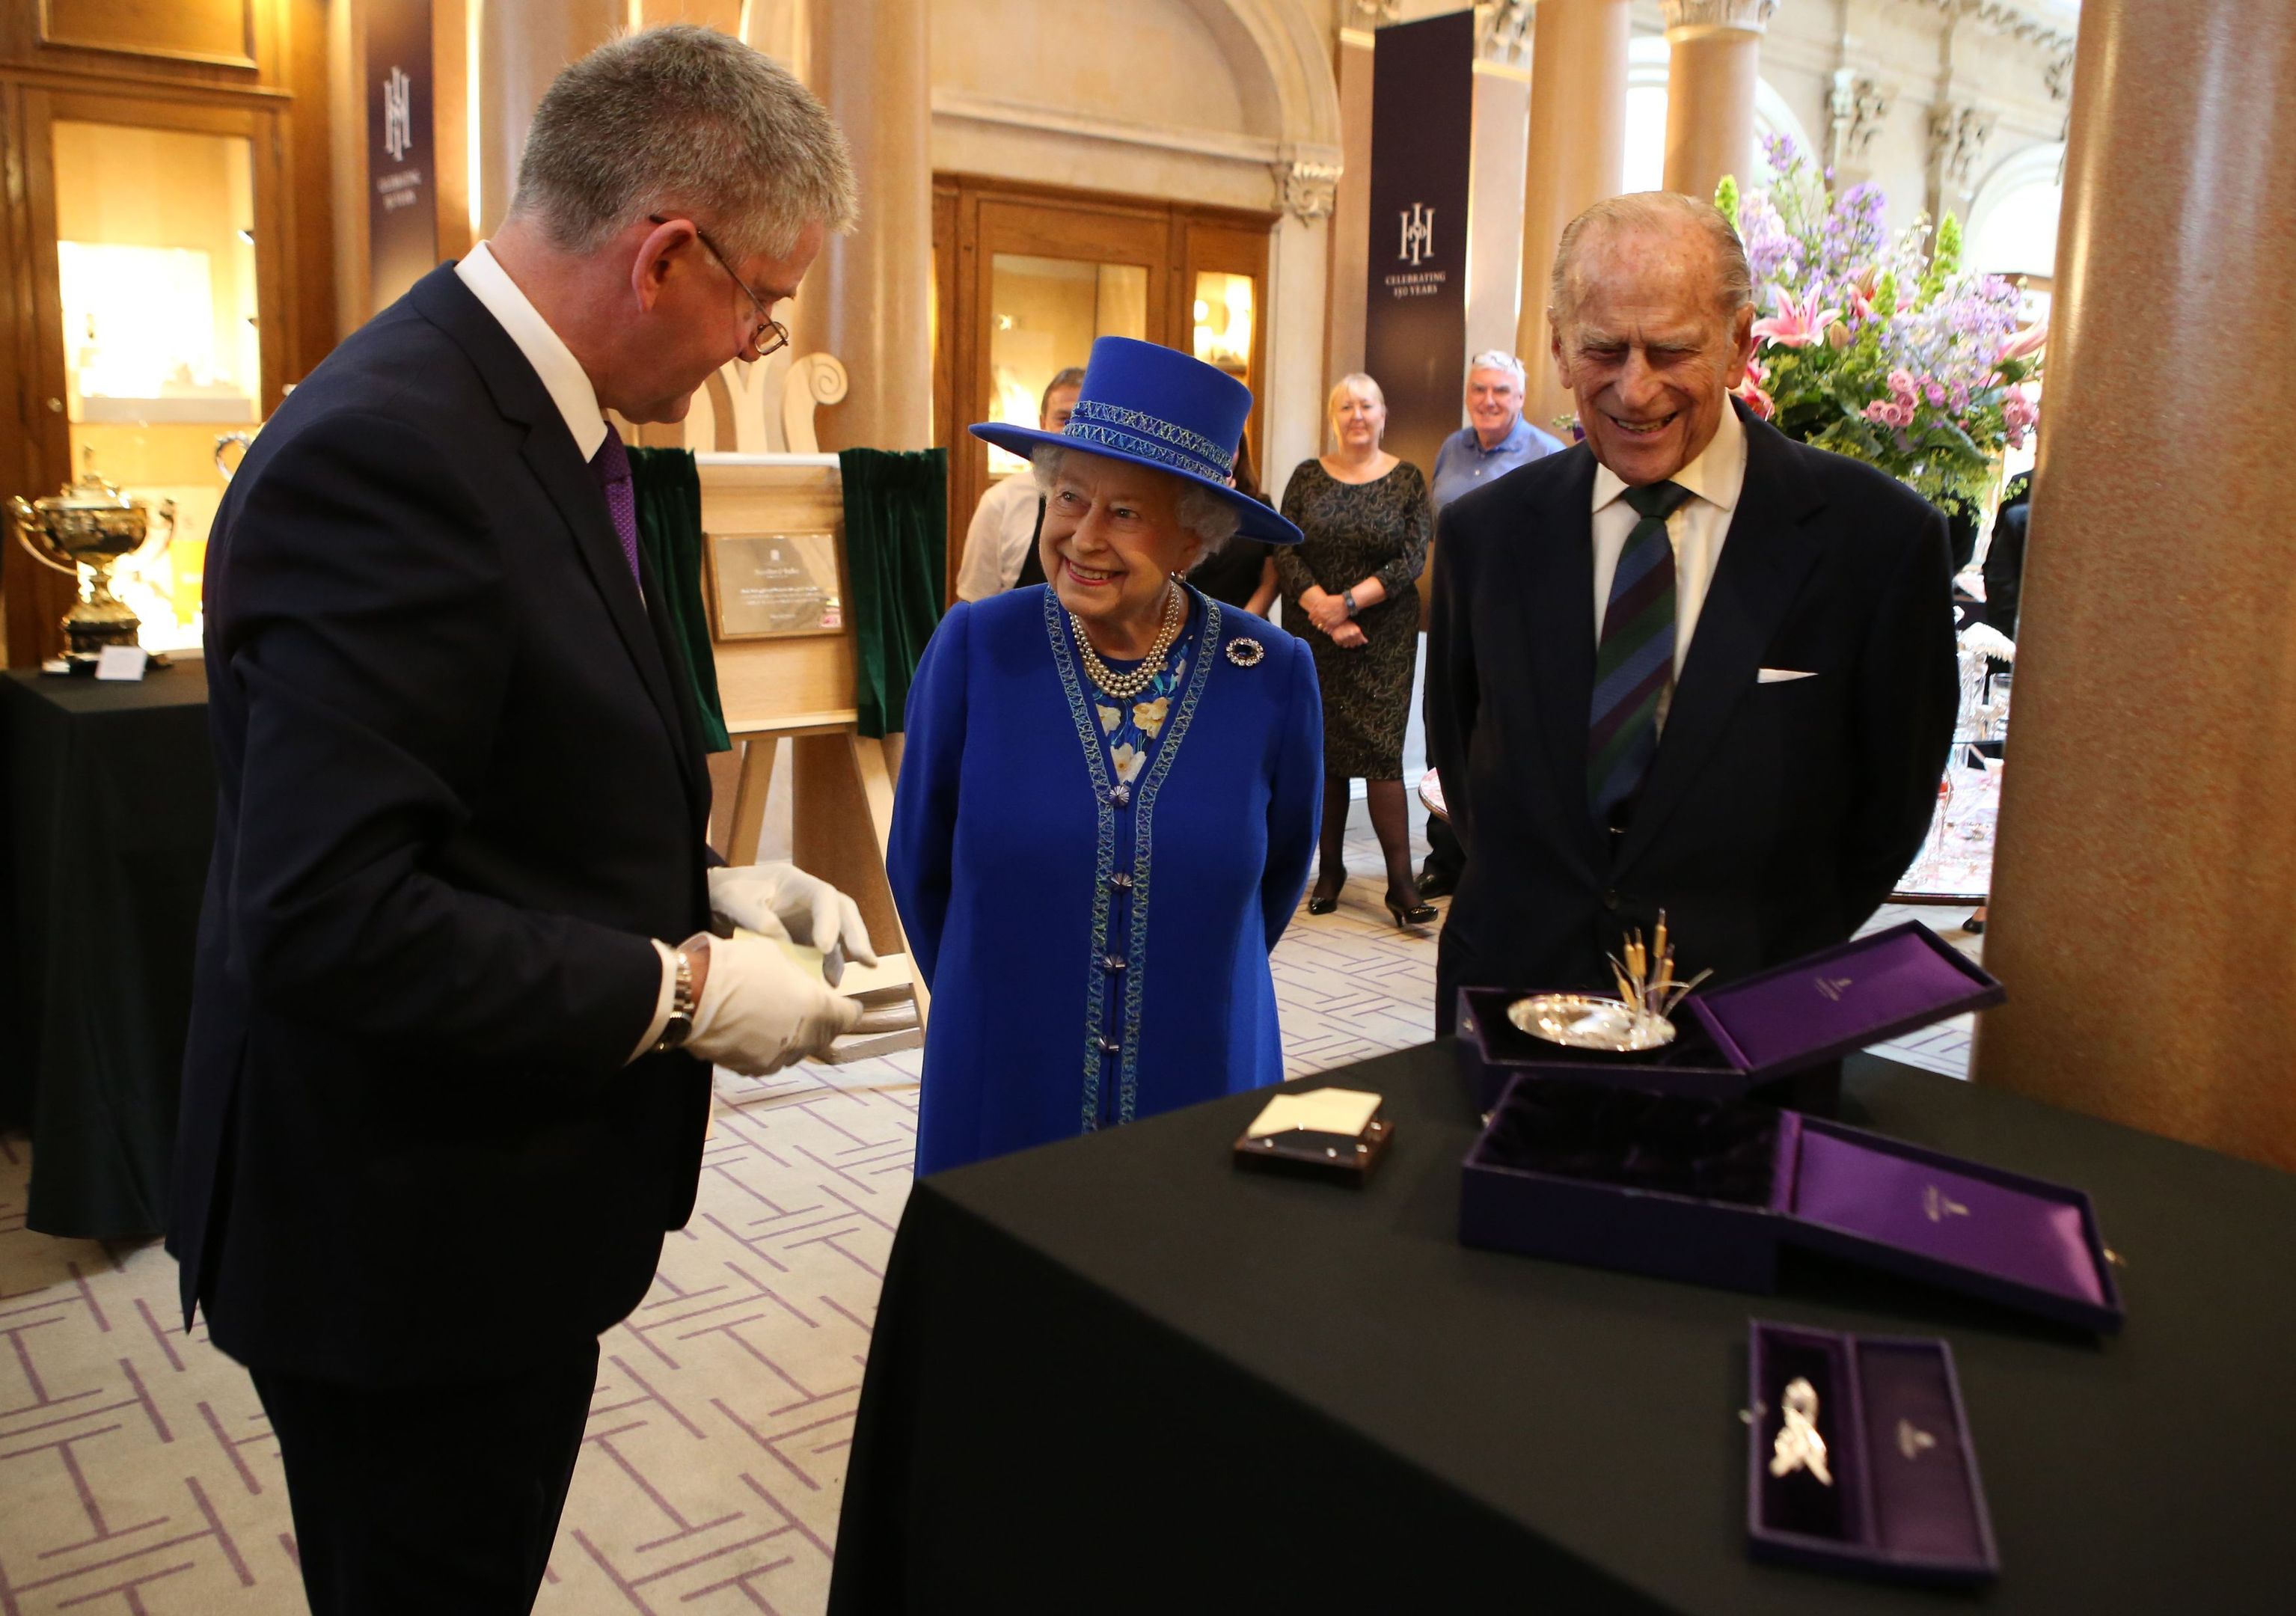 The Queen and the Duke of Edinburgh are presented with gifts by Chief Executive Stephen Paterson.